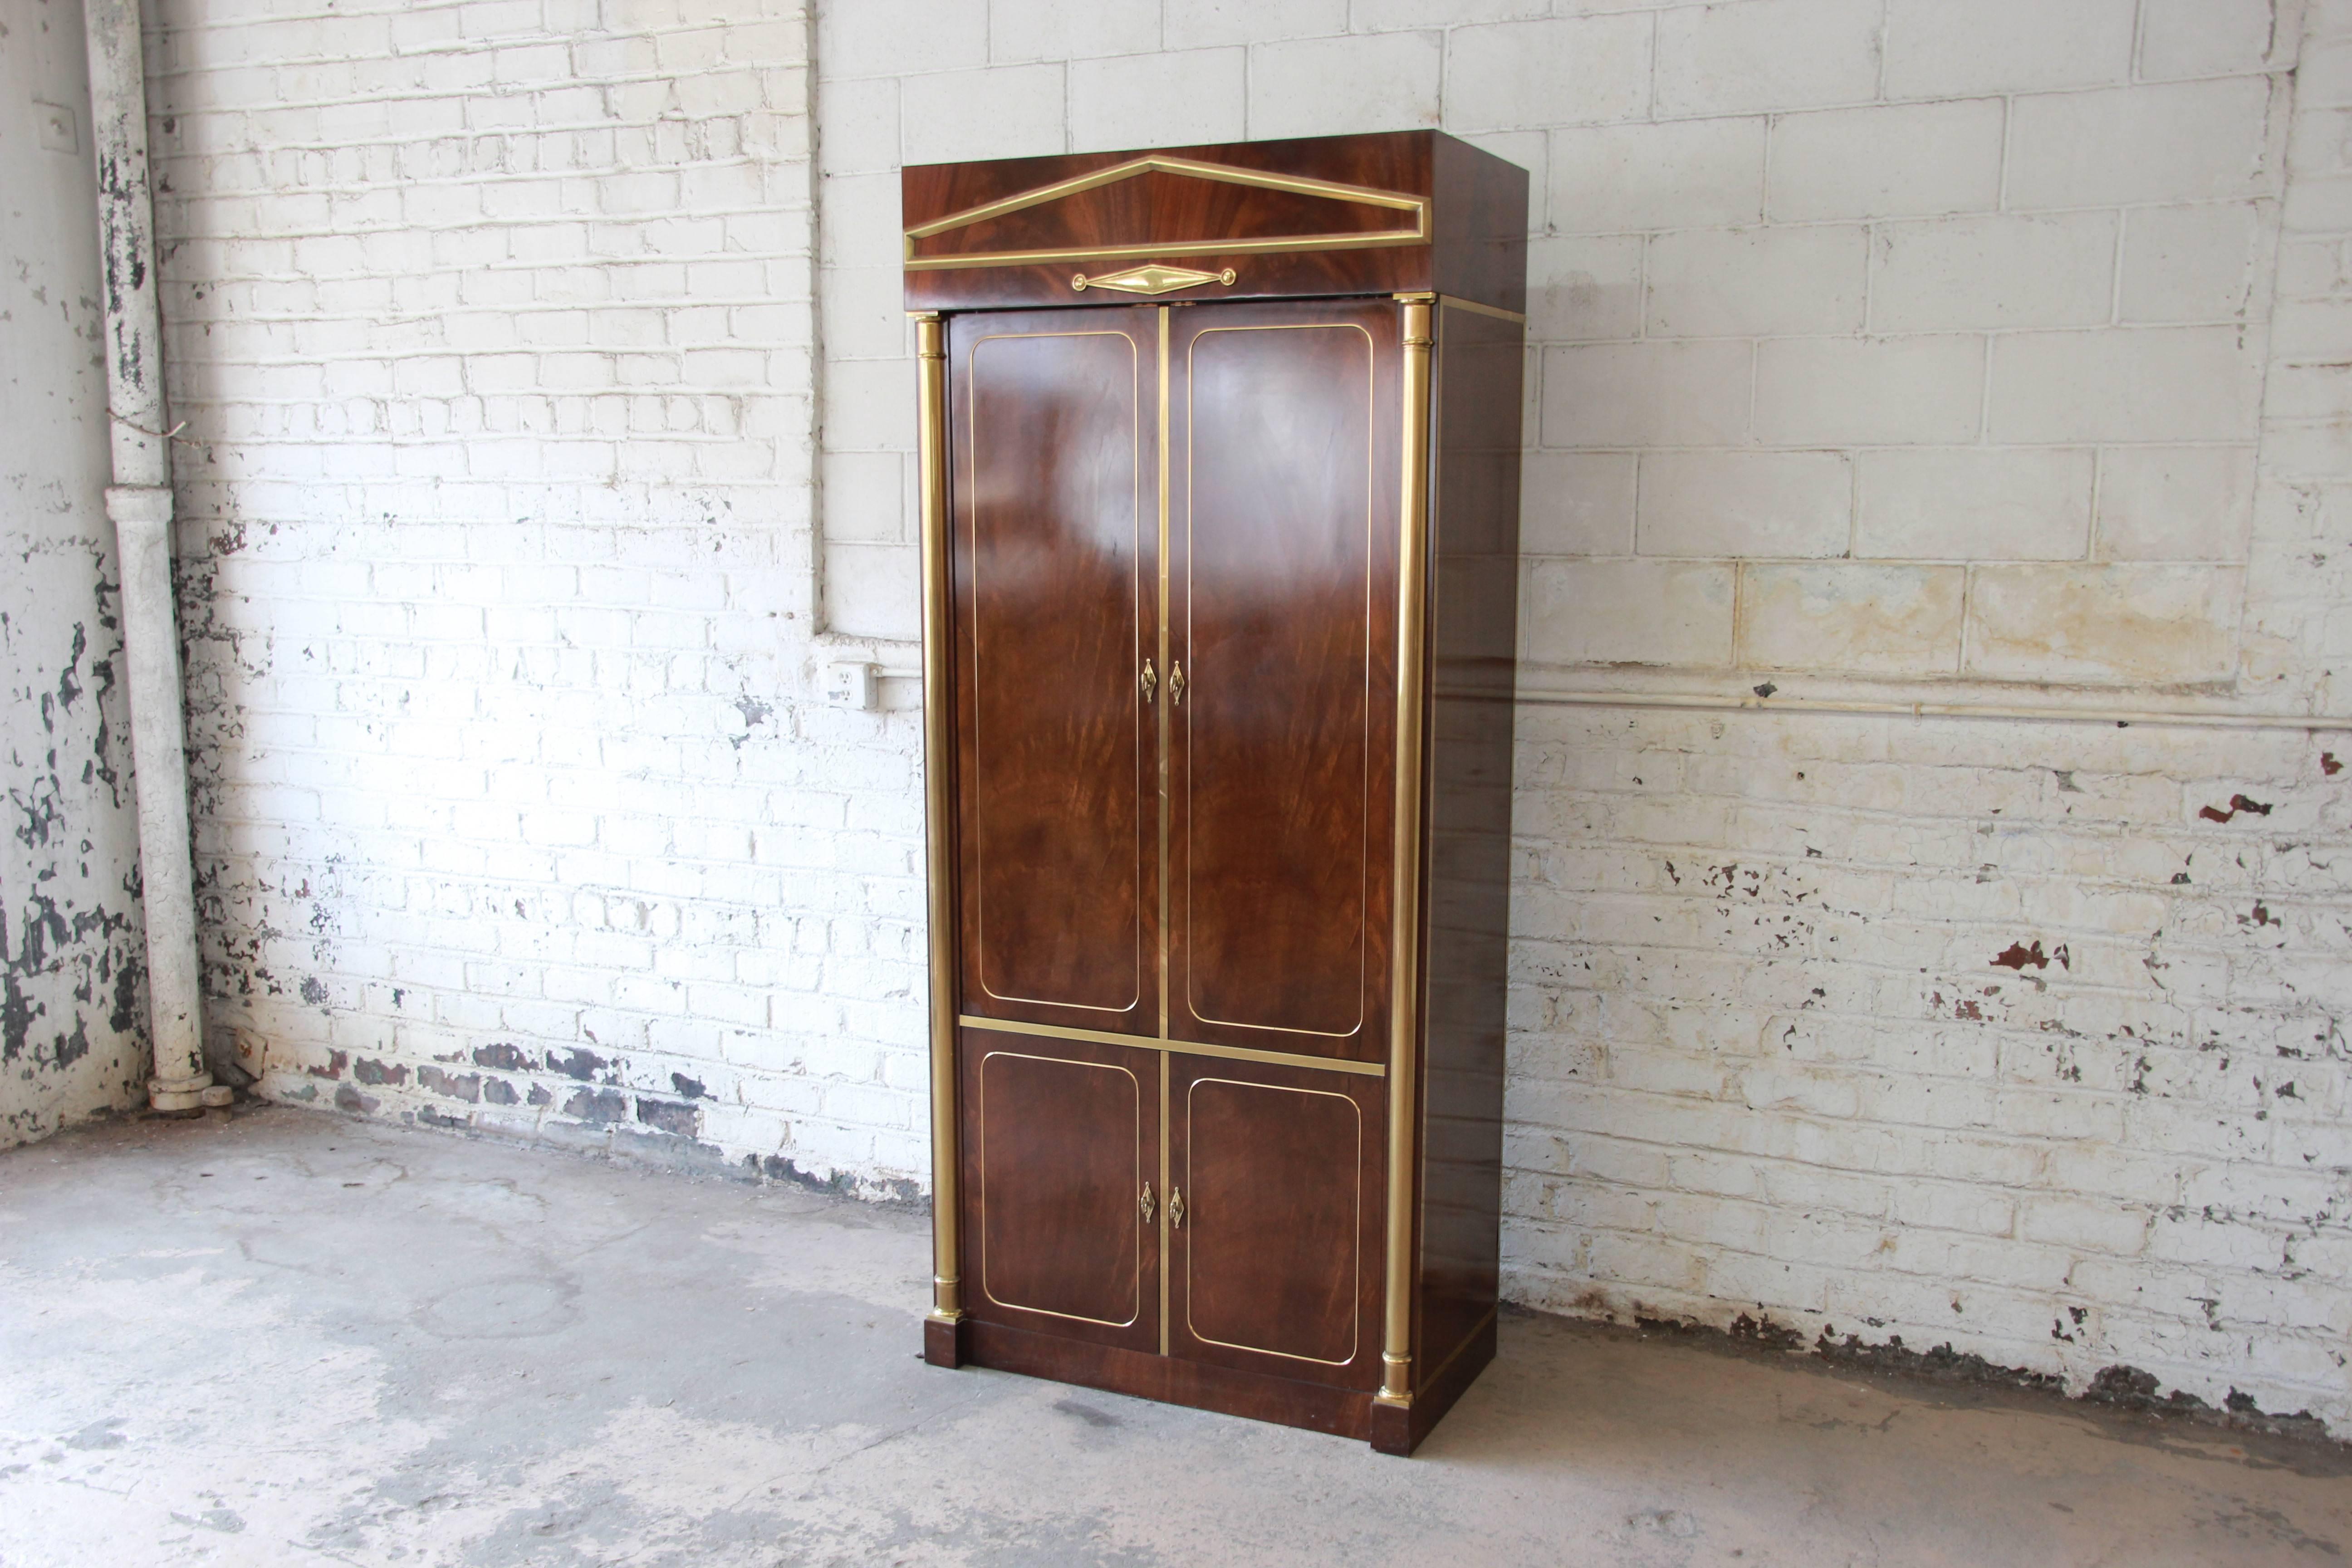 An exceptional burl wood and brass lighted bar cabinet by Mastercraft. The cabinet features stunning burl wood grain and handsome brass columns and trim. The top interior has a mirrored back, two glass shelves, a slide out tray, and a single